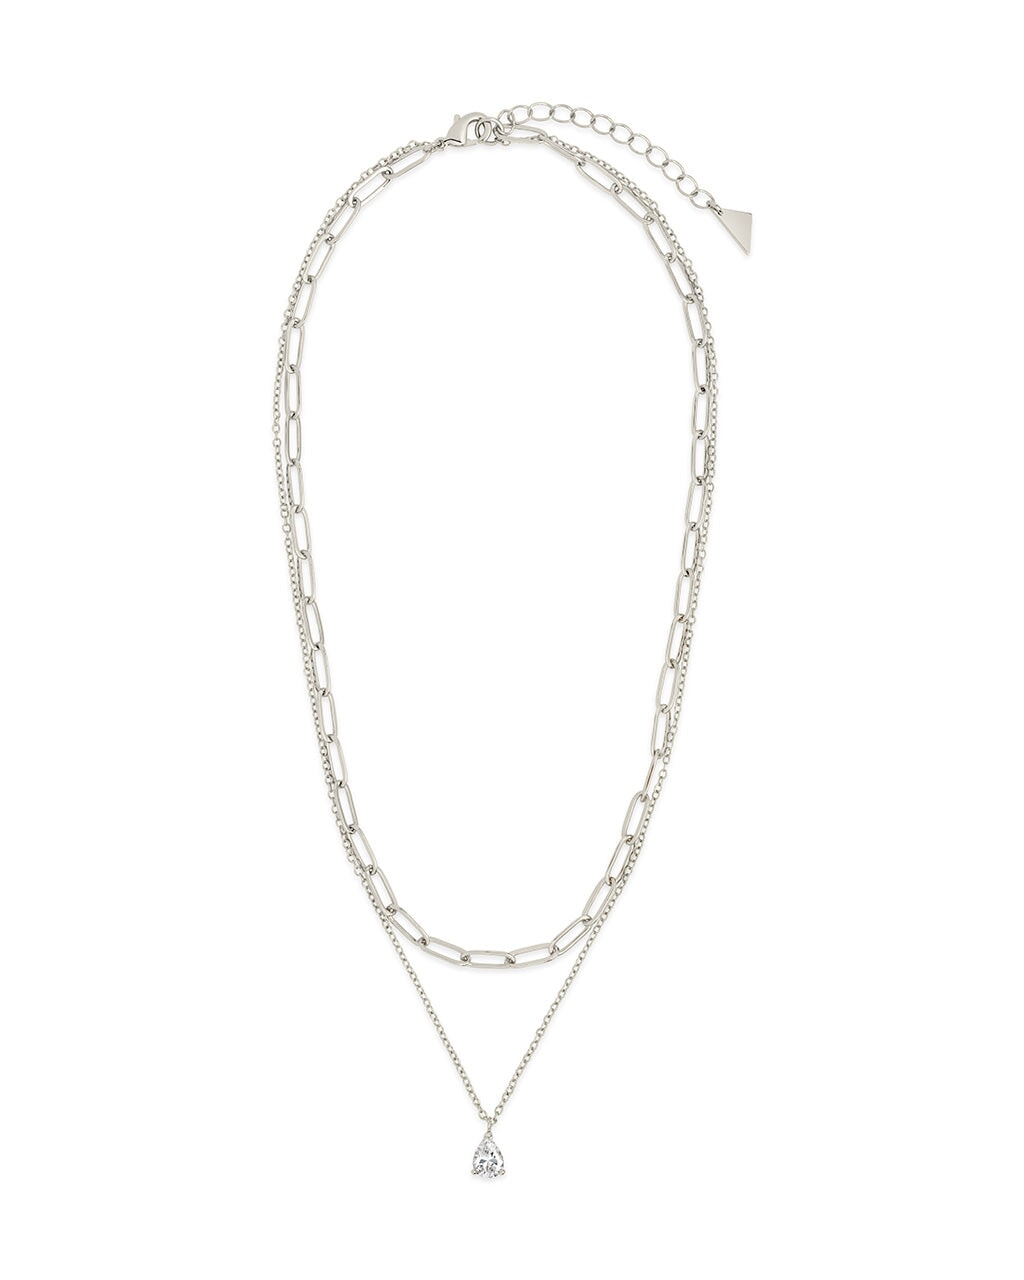 Savannah CZ Teardrop Pendant & Layered Chain Necklace – Sterling Forever